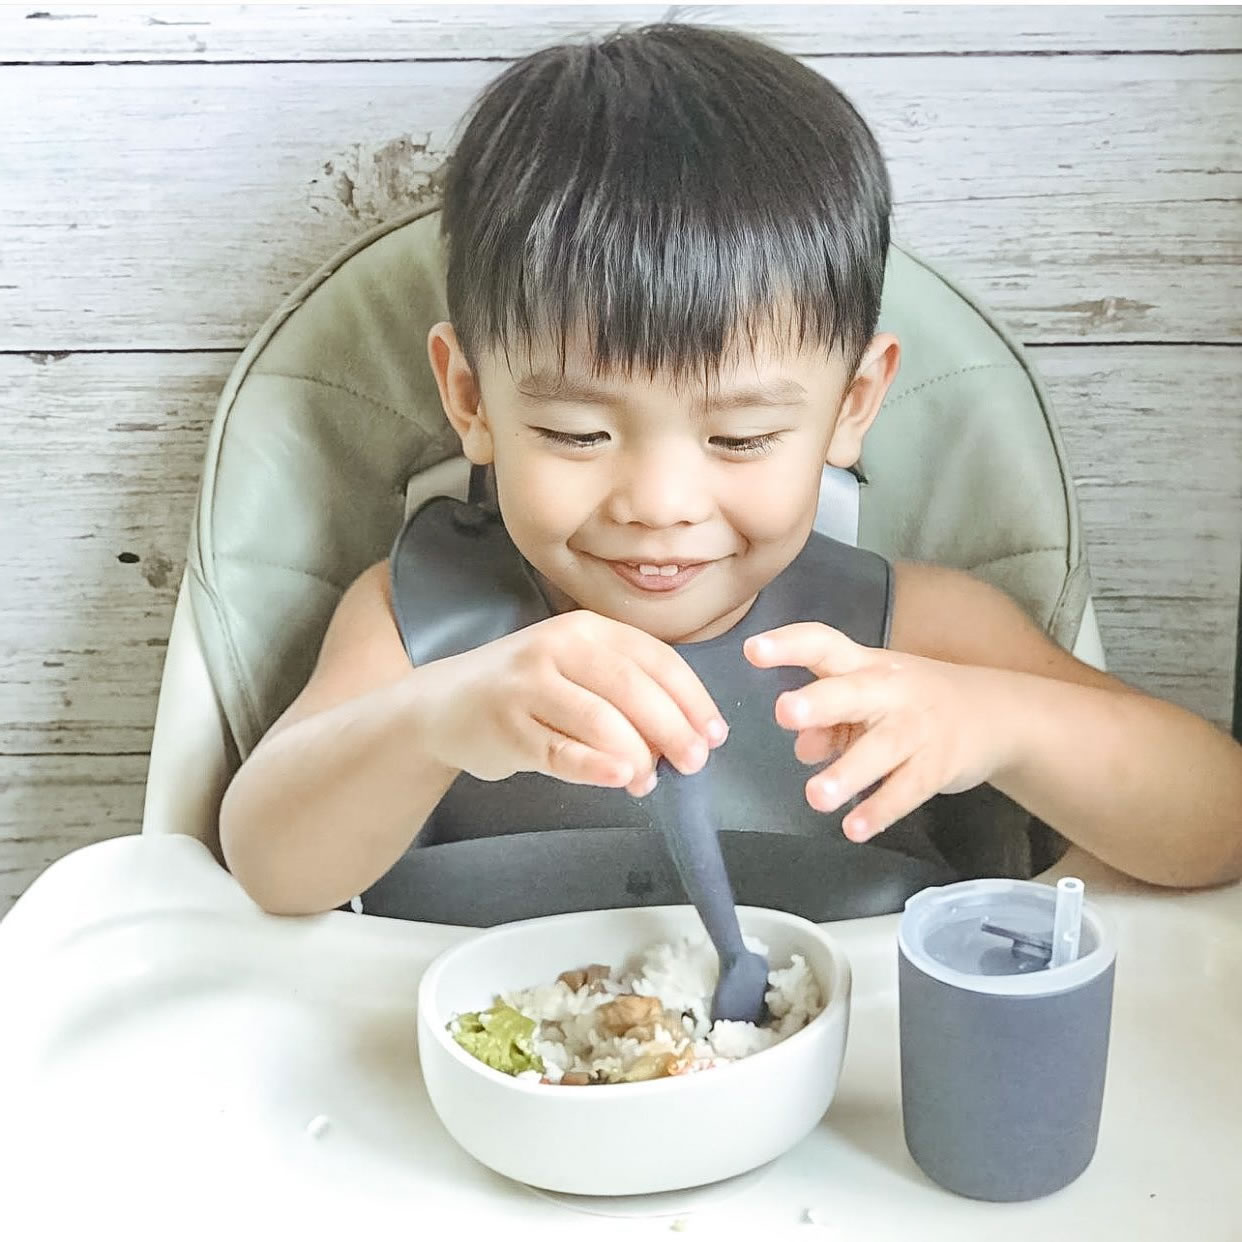 Making Mealtime Fun and Easy with a Silicone Baby Feeding Set